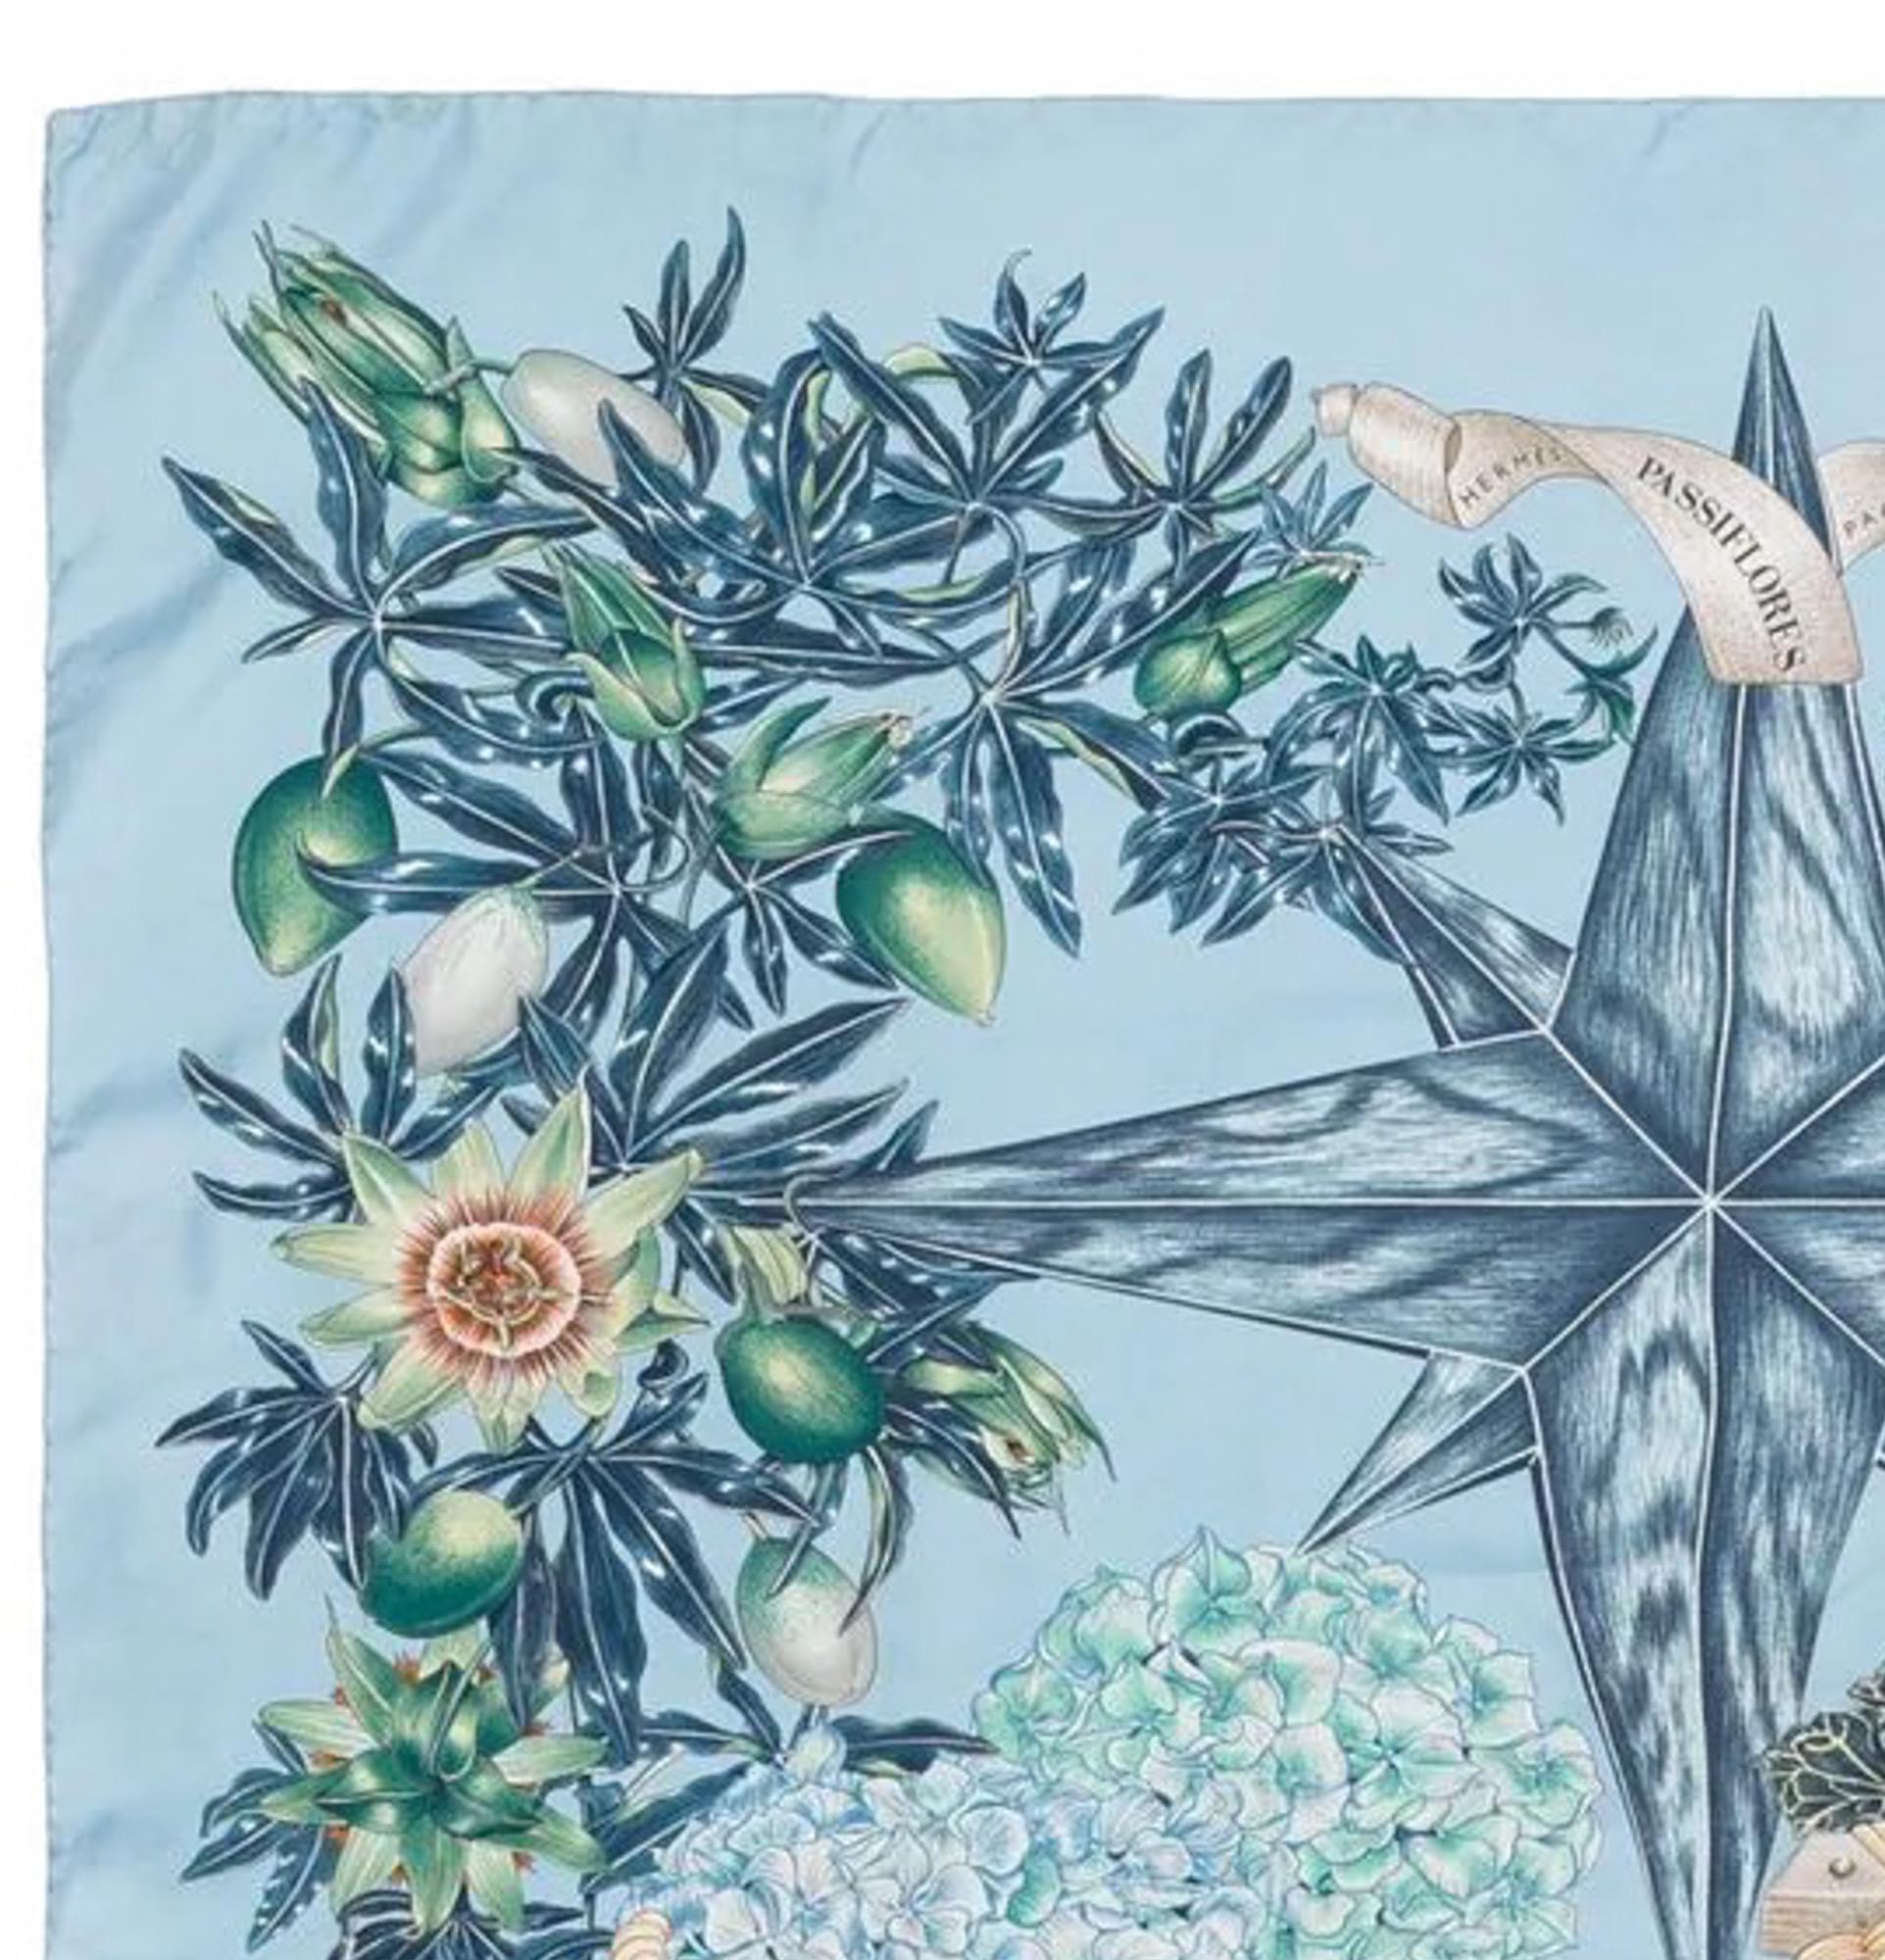 Hermes silk scarf “Passiflores” by Valérie Dawlat-Dumoulin featuring a blue border, a free birds scene and a Hermès signature. 
Circa 1996  
In good vintage condition. Made in France.
35,4in. (90cm)  X 35,4in. (90cm)
We guarantee you will receive